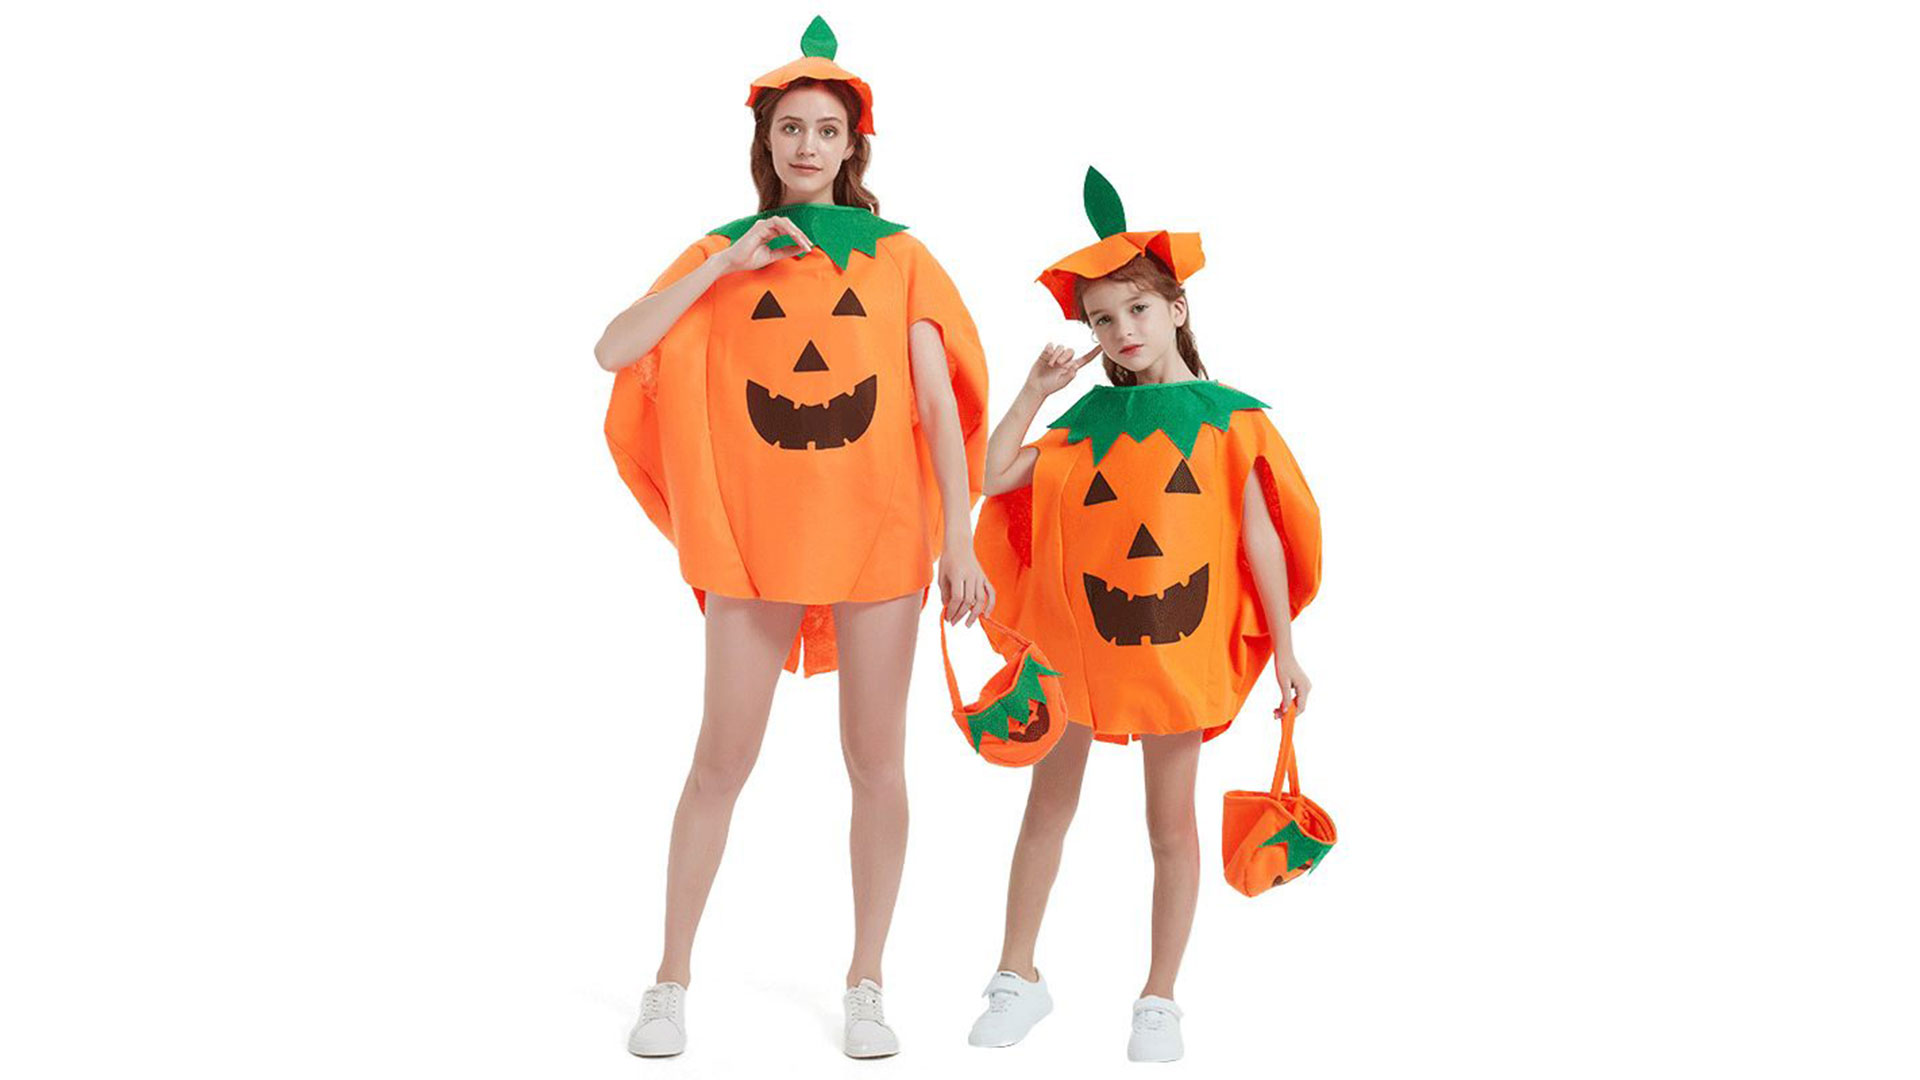 Mother and daughter dressed up in pumpkin costumes for Halloween.